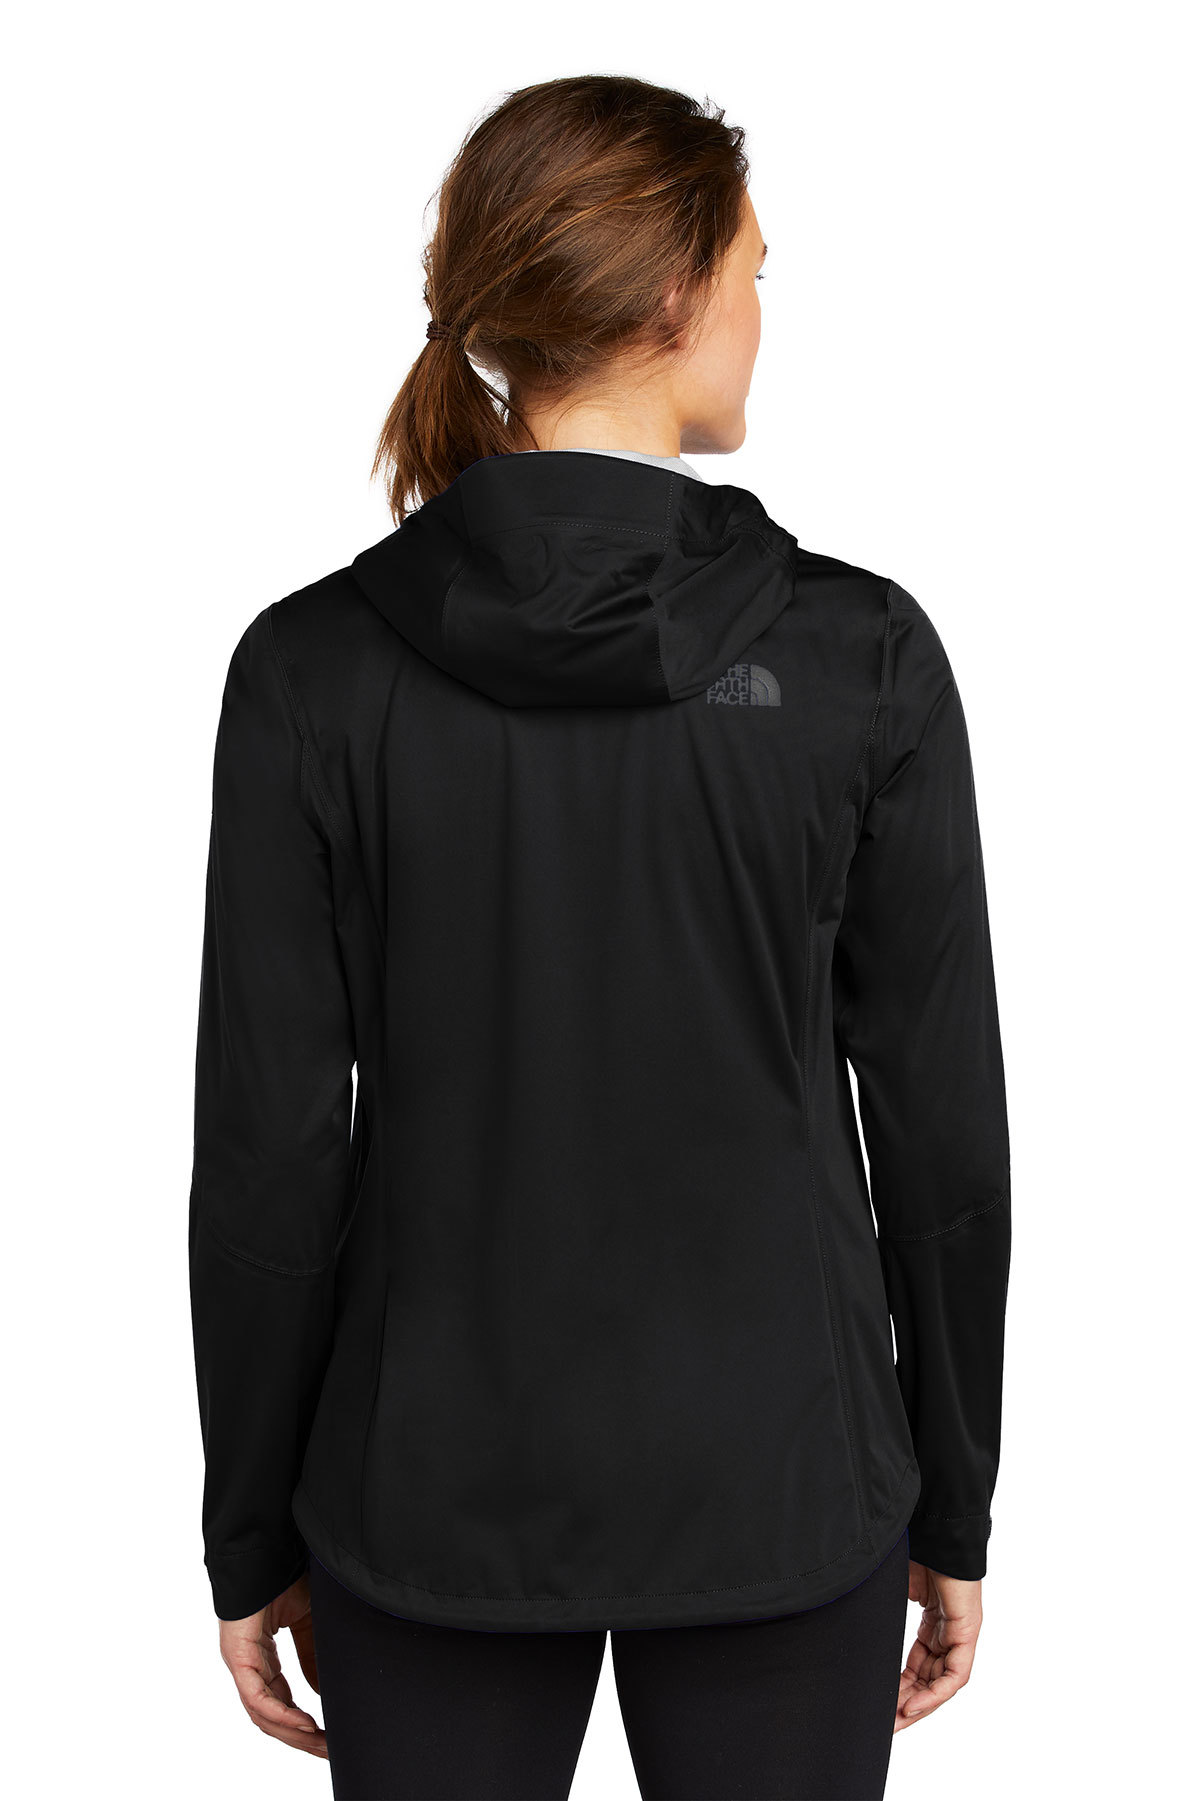 The North Face Ladies All-Weather DryVent Stretch Jacket | Product ...